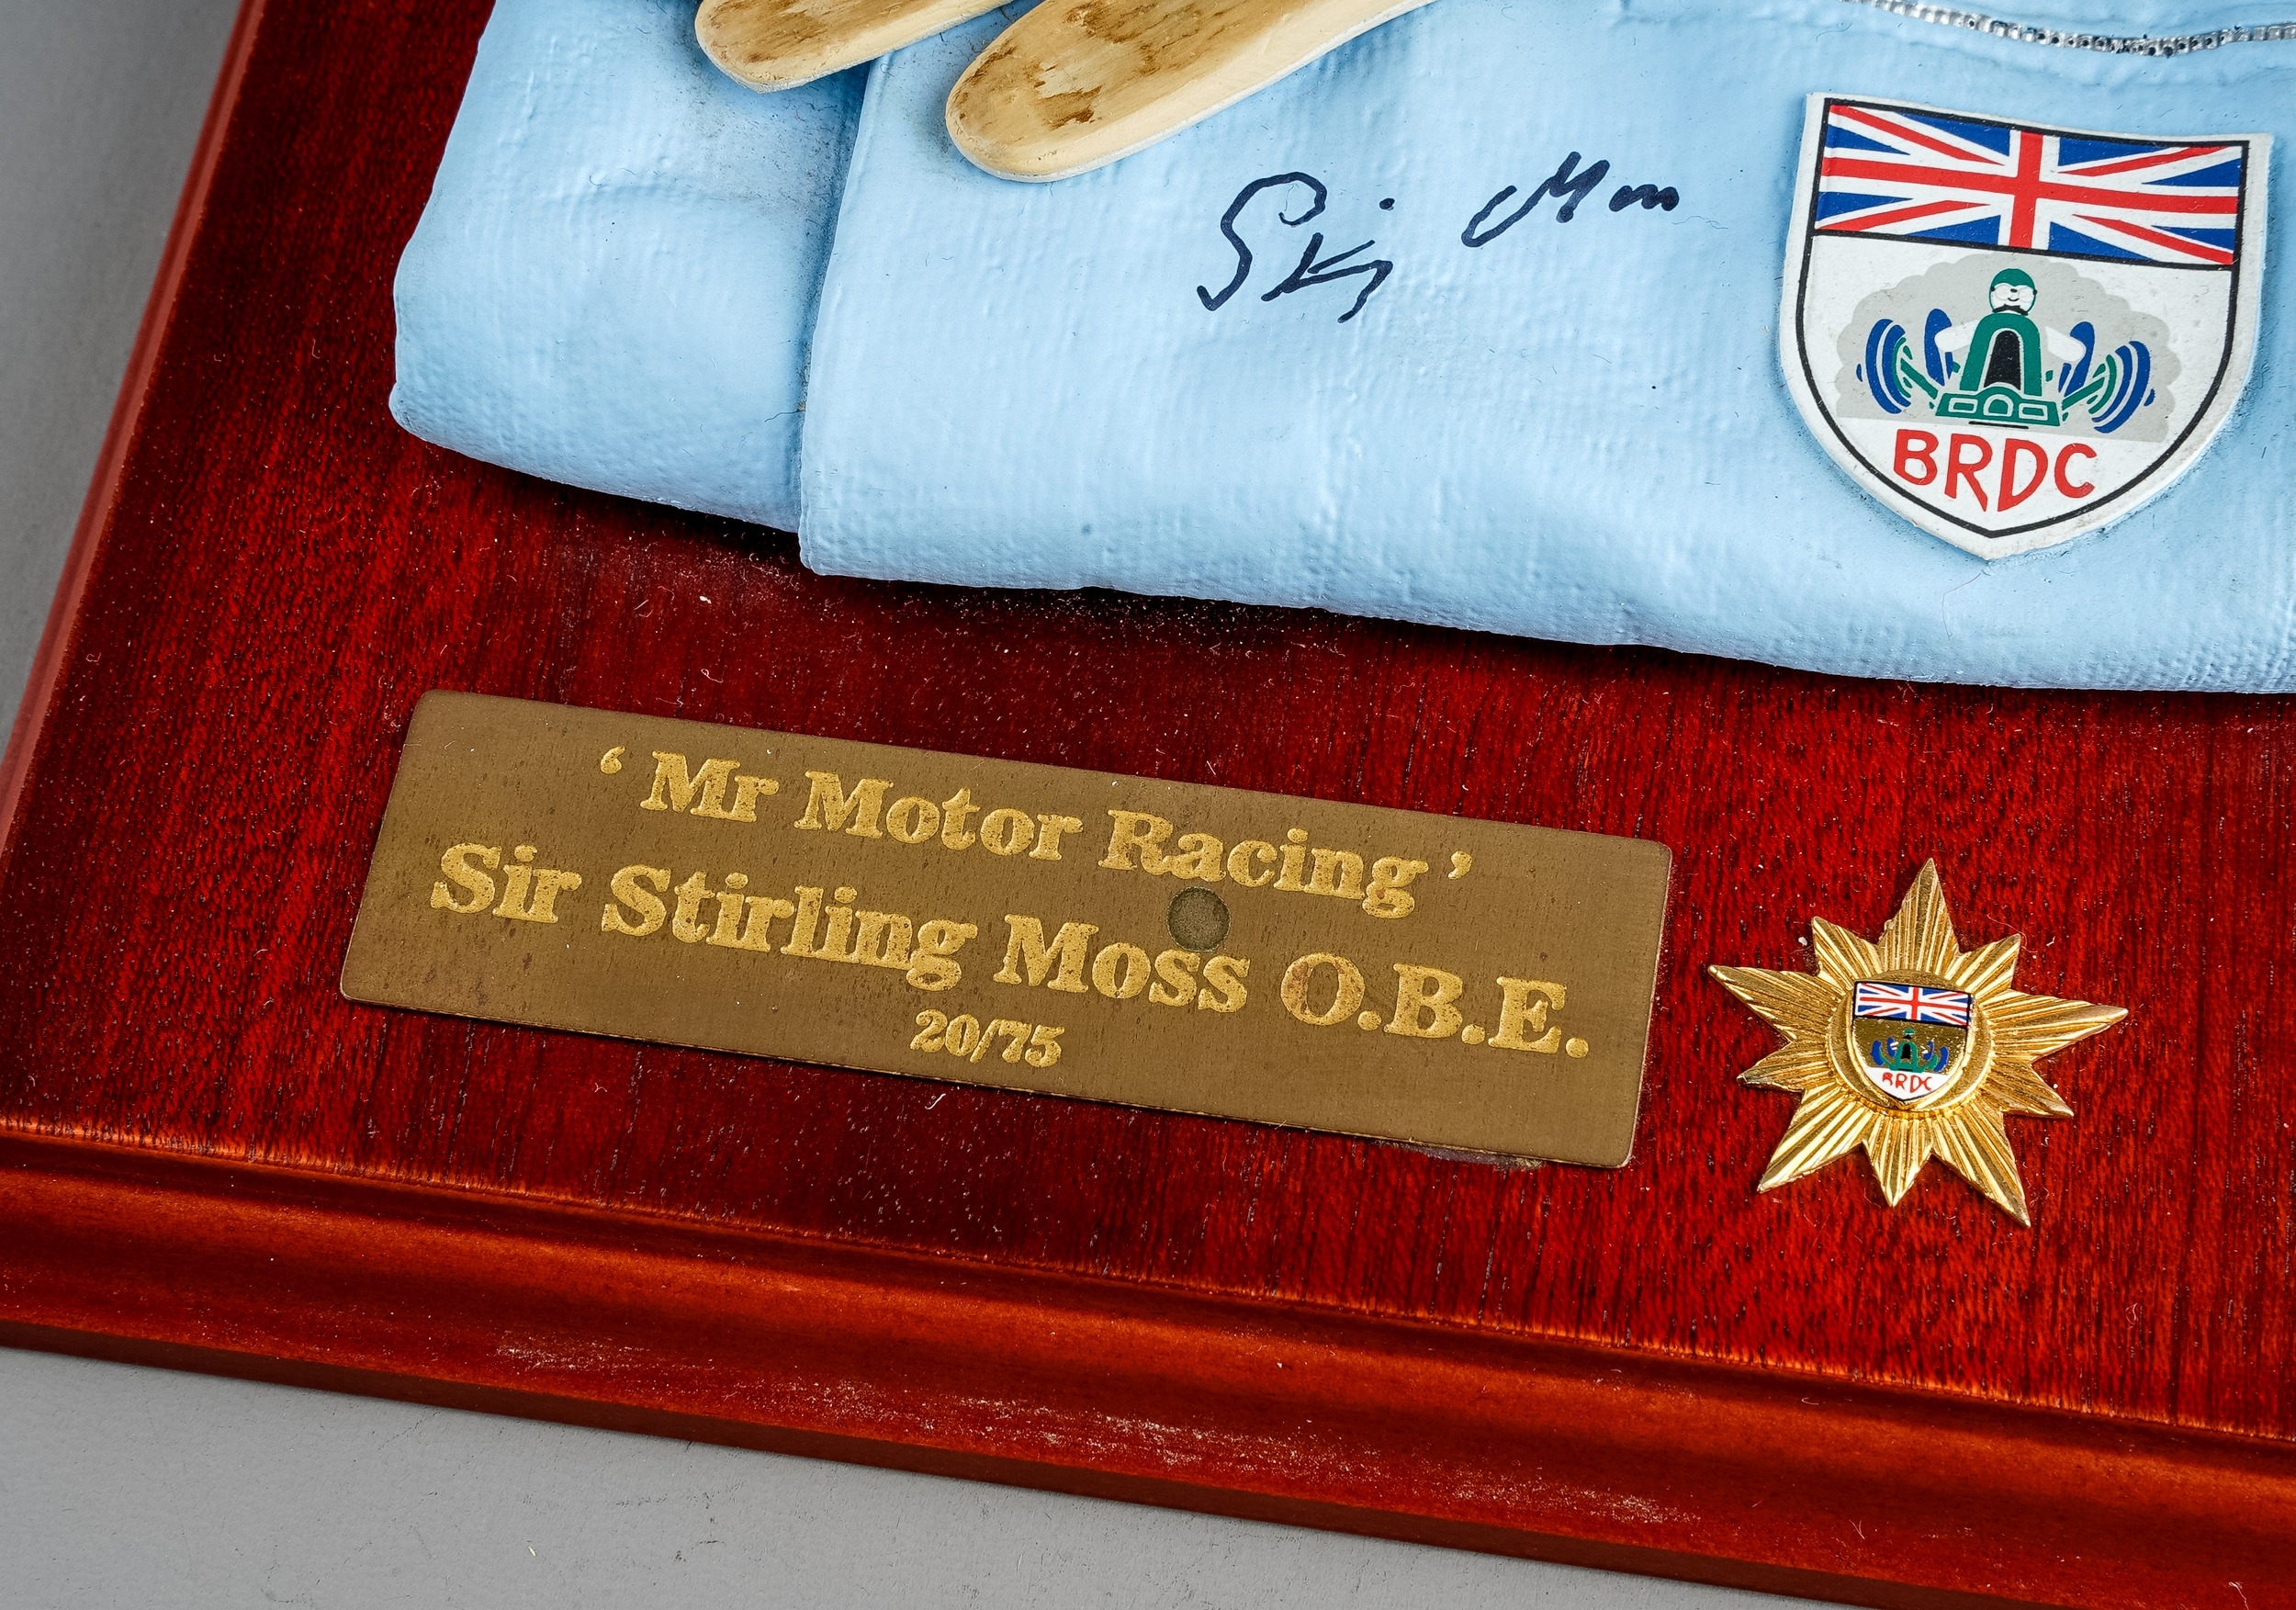 Motor racing interest - "Mr Motor Racing" - Sir Stirling Moss OBE: A limited edition 20/75 diorama - Image 2 of 3